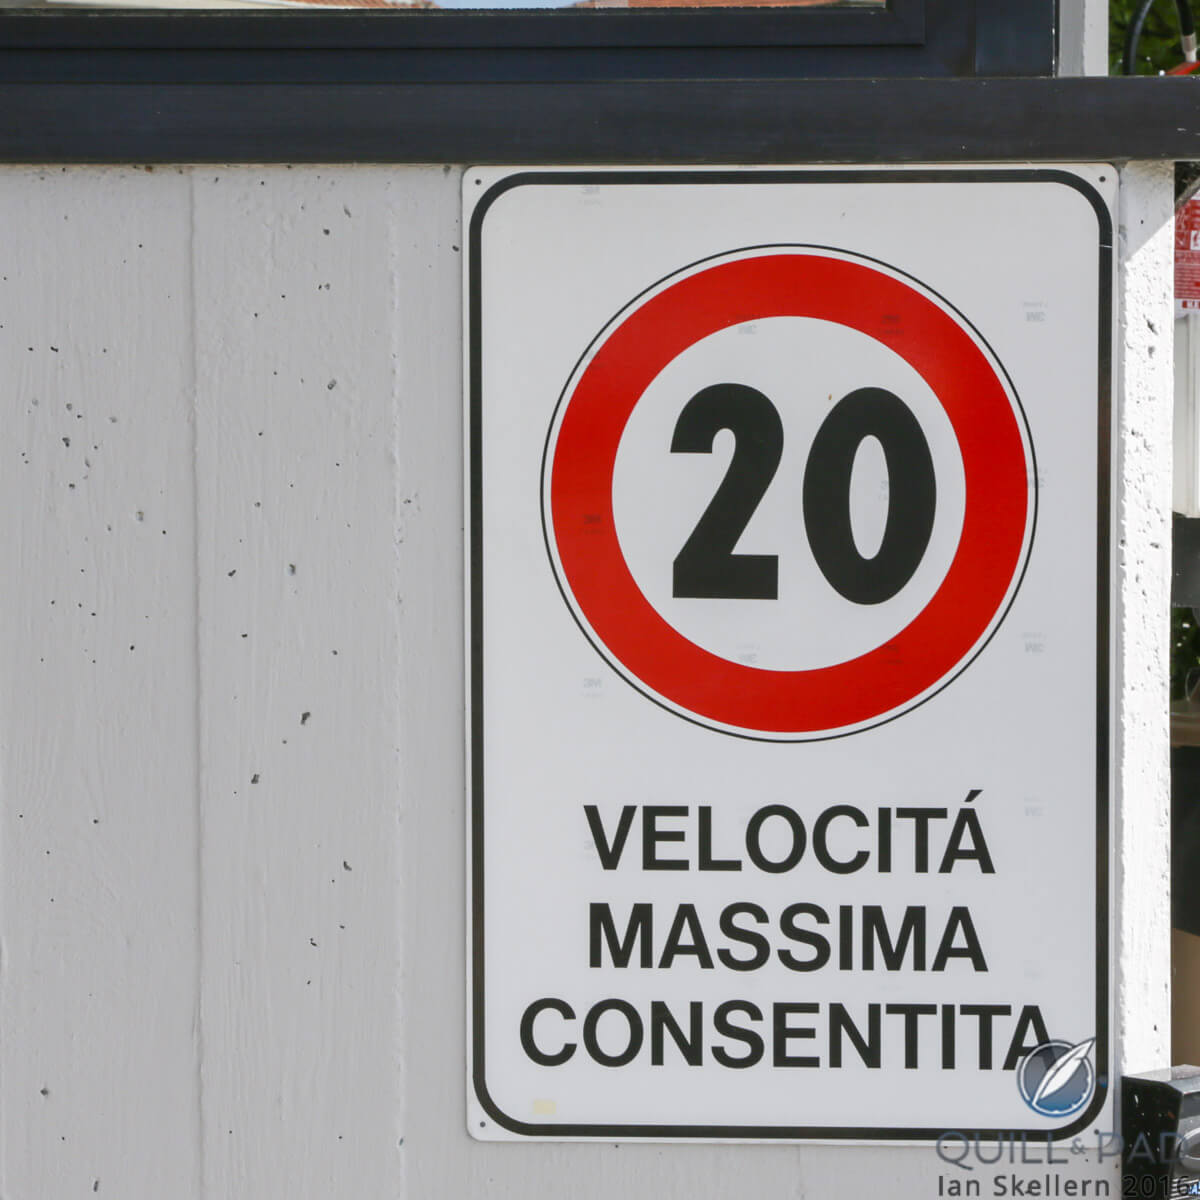 uite a restrictive speed limit in the home of the world's fastest supercars